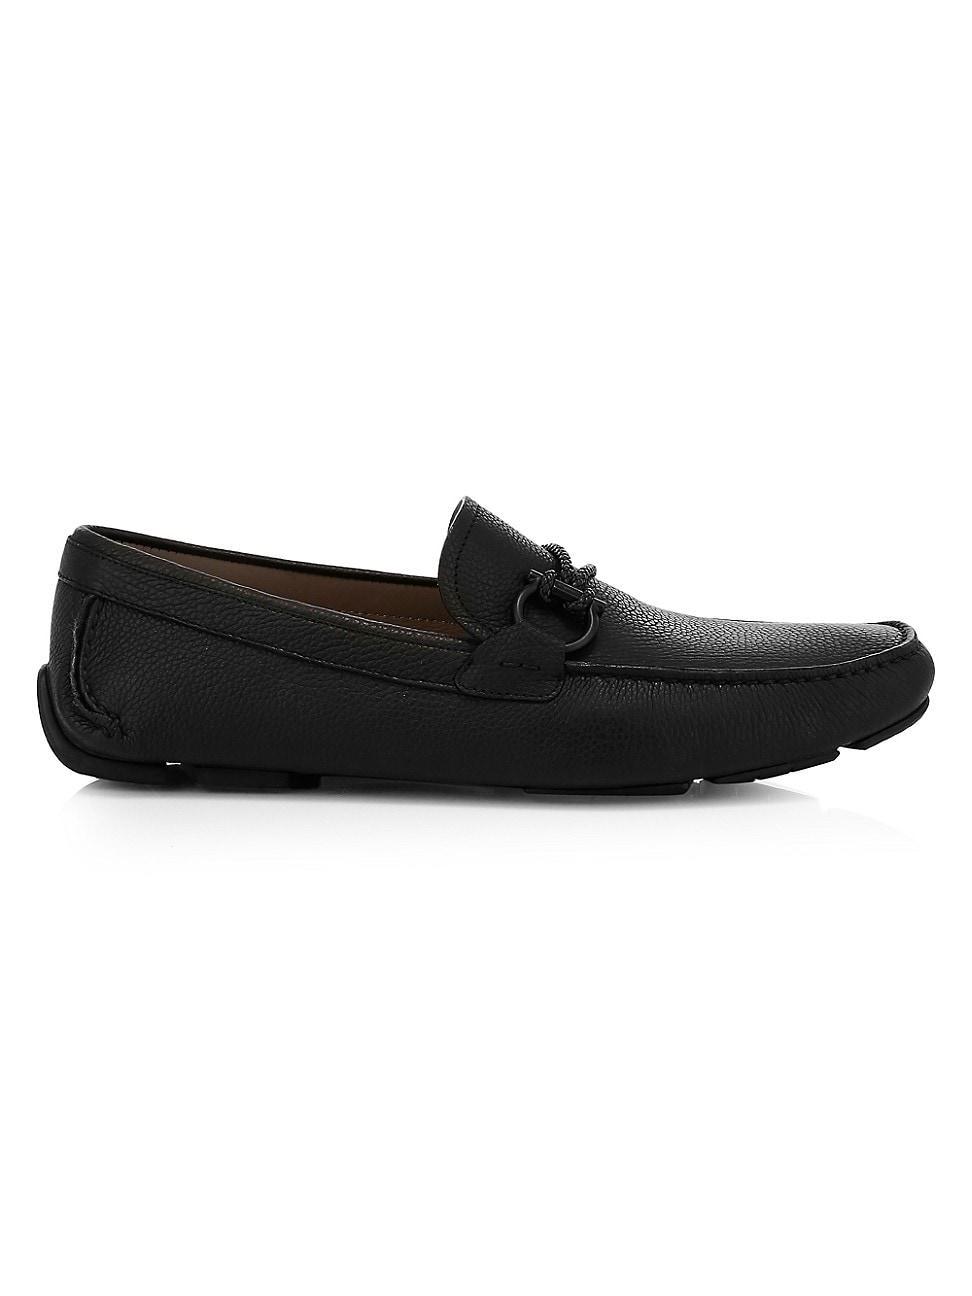 Mens Front Buckle Leather Driver Loafers Product Image